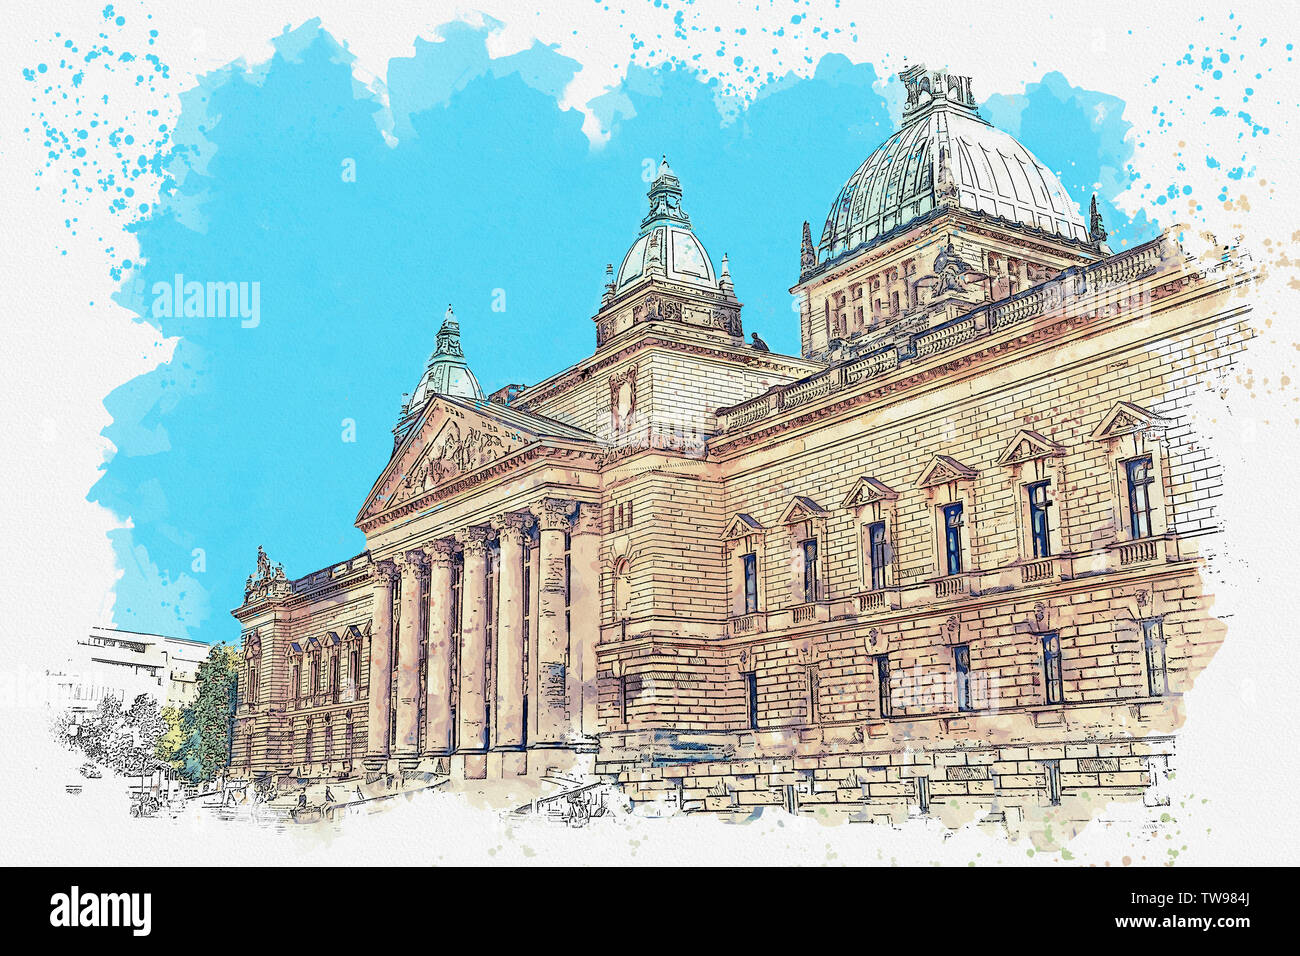 Watercolor sketch or illustration of a beautiful view of a traditional classical old building in Leipzig, Germany. Stock Photo